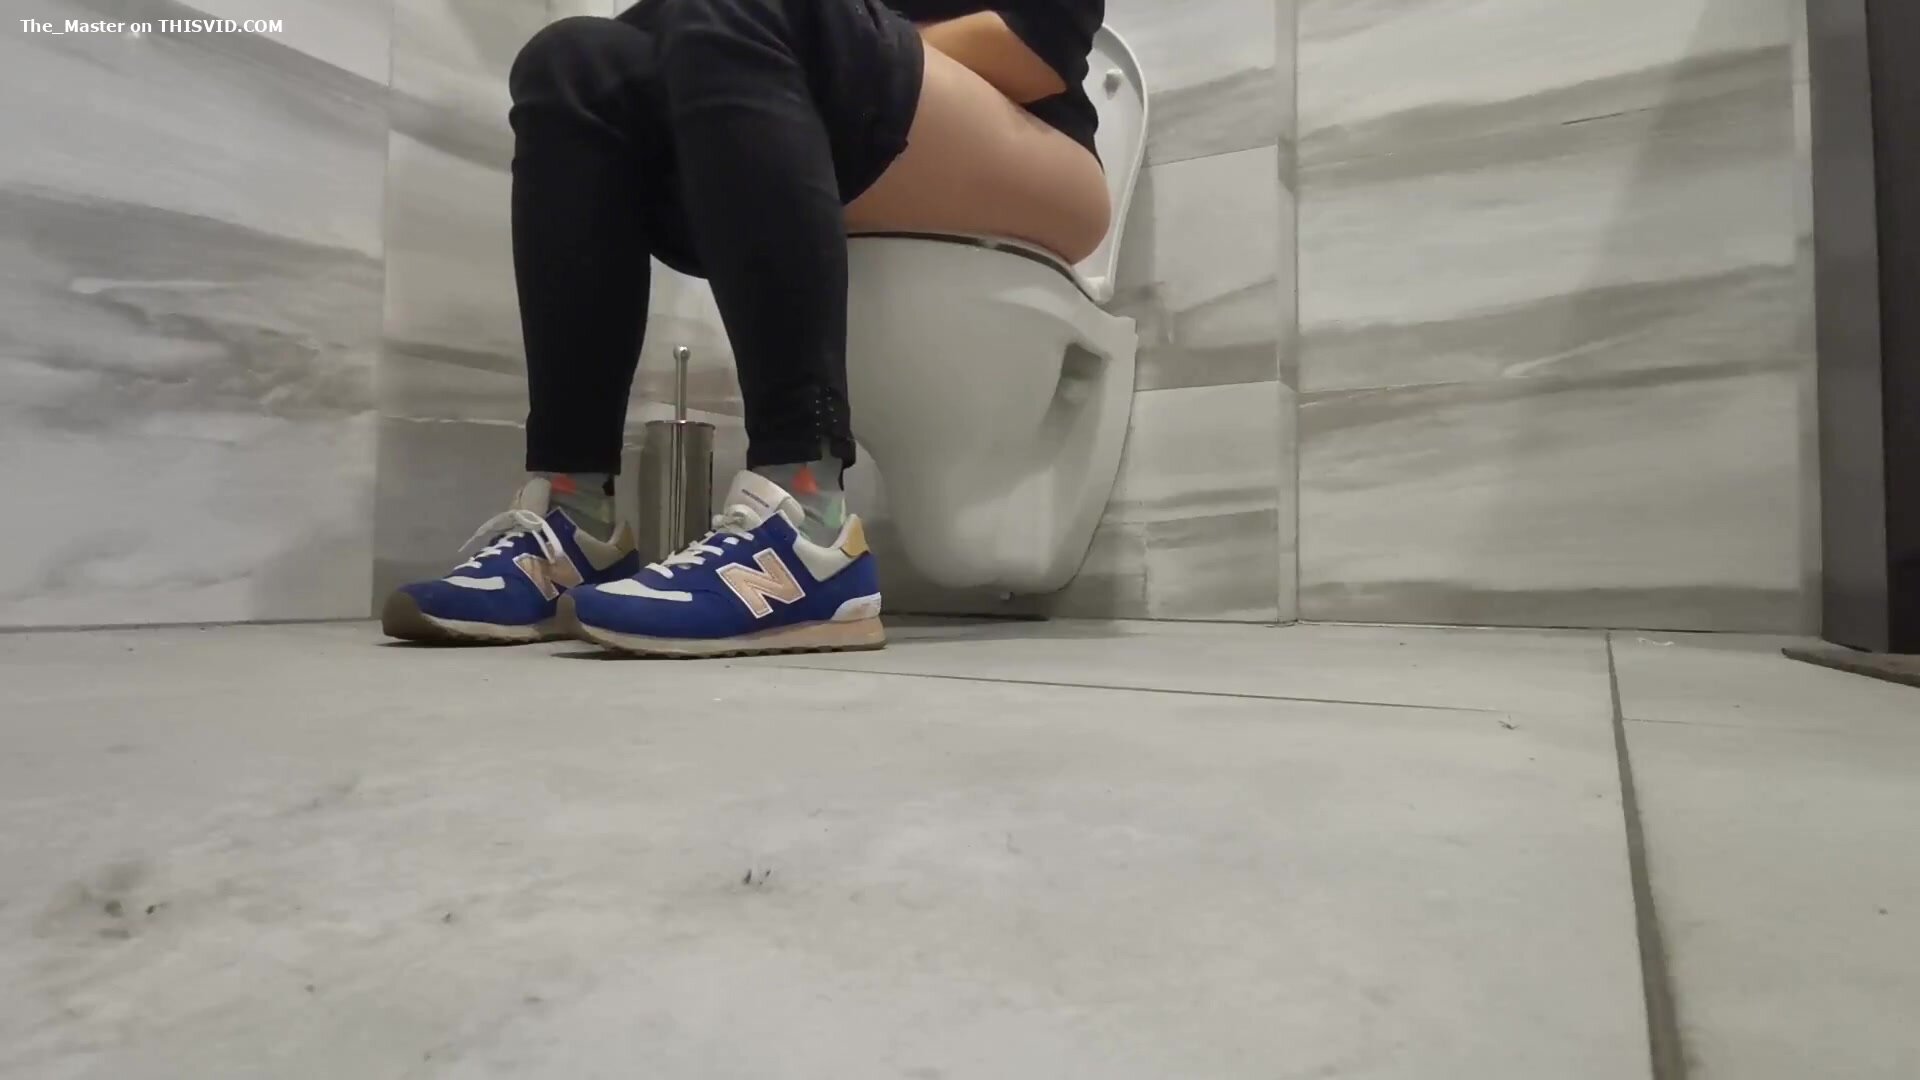 Sexy blonde girl pooping and farting on toilet